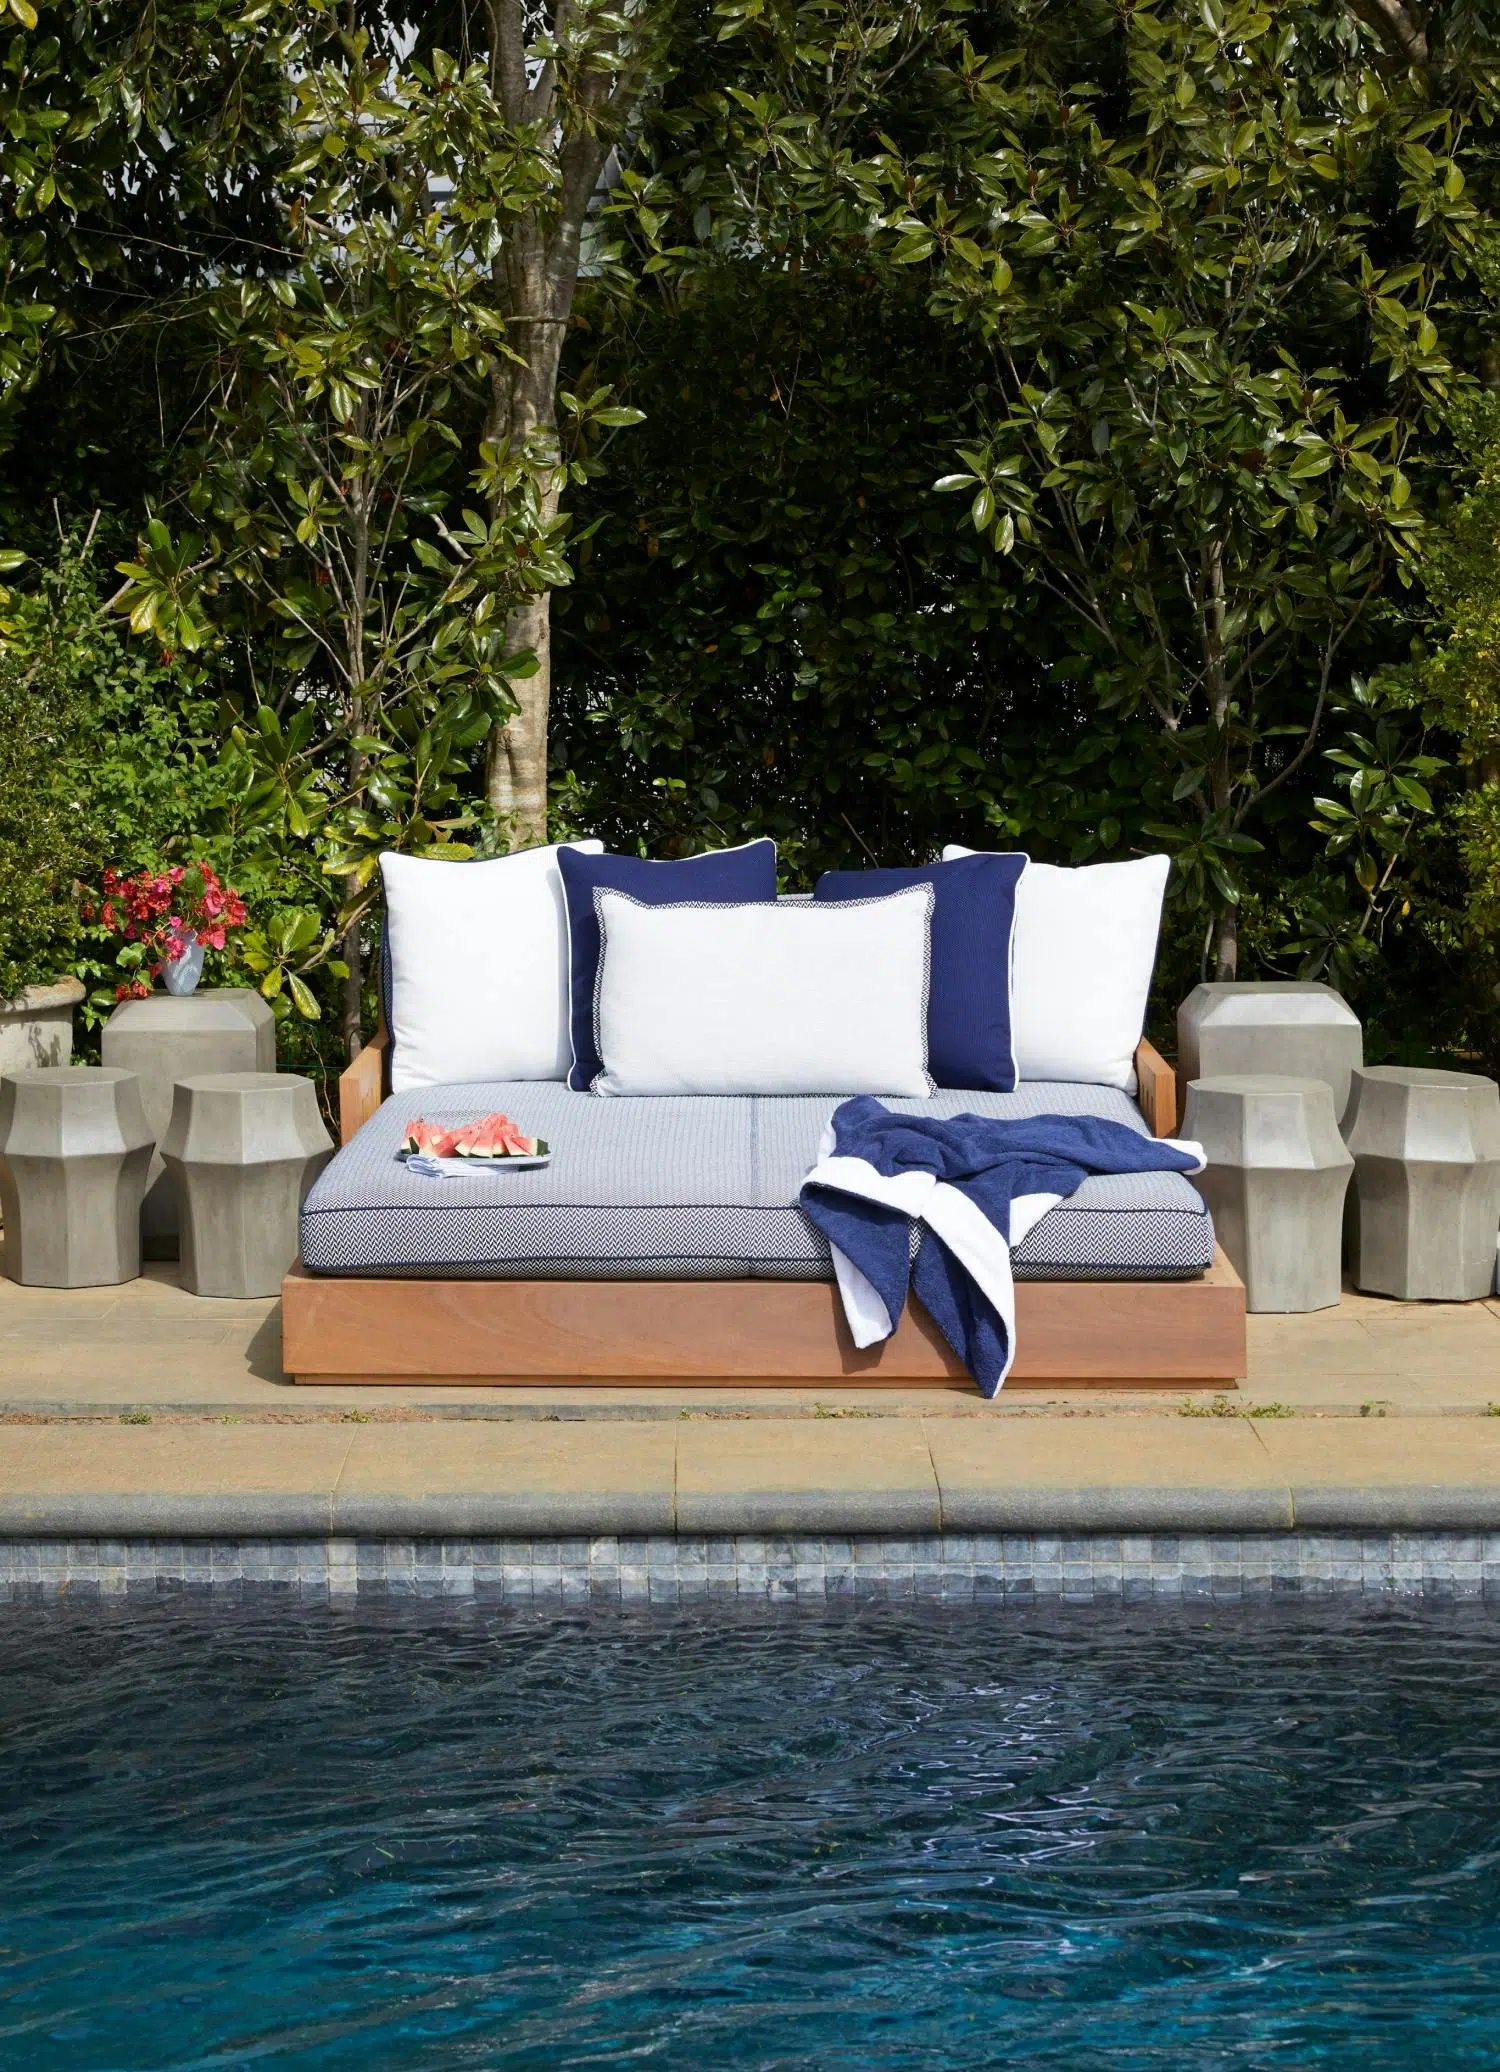 The water of a dark-bottomed swimming pool is visible in front of poolside furniture holding blue and white cushions, a blue-and-white towel, and a plate of watermelon slices. Lush greenery is in the background.